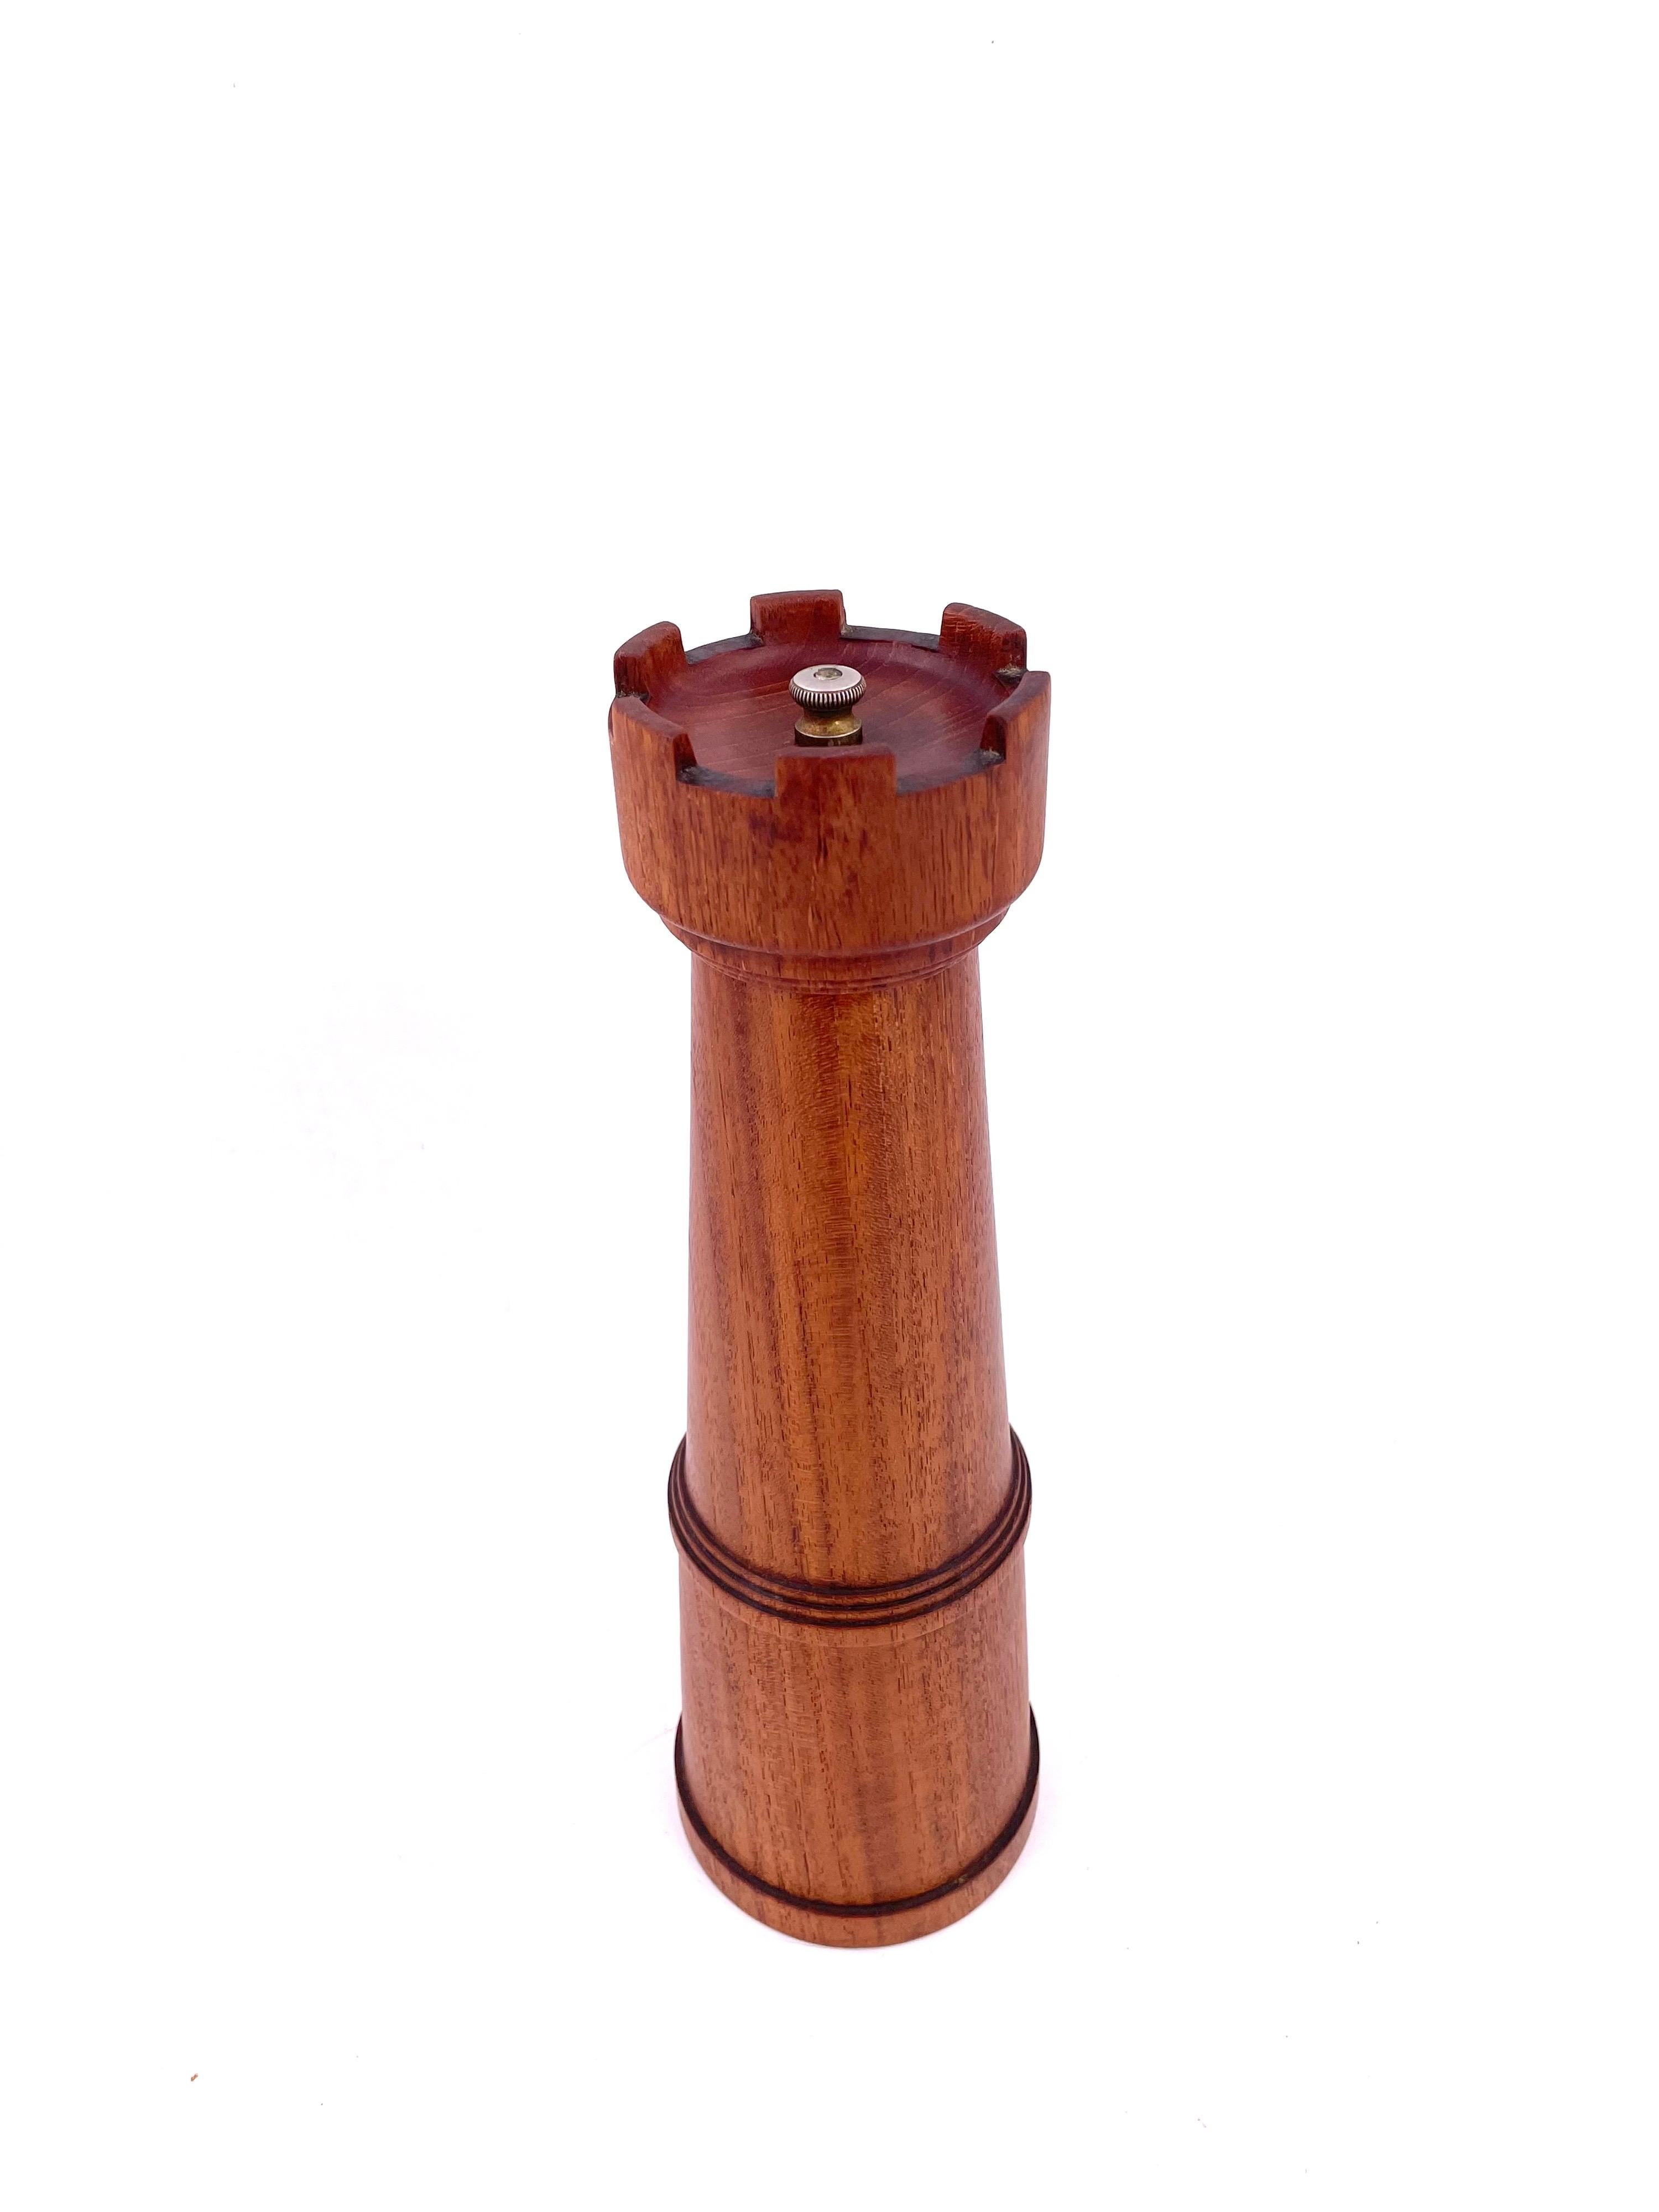 Beautiful tall unique rare tall solid teak 1950's chess tower, pepper shaker with English metal mechanism by Galatix we have oiled and cleaned the piece.